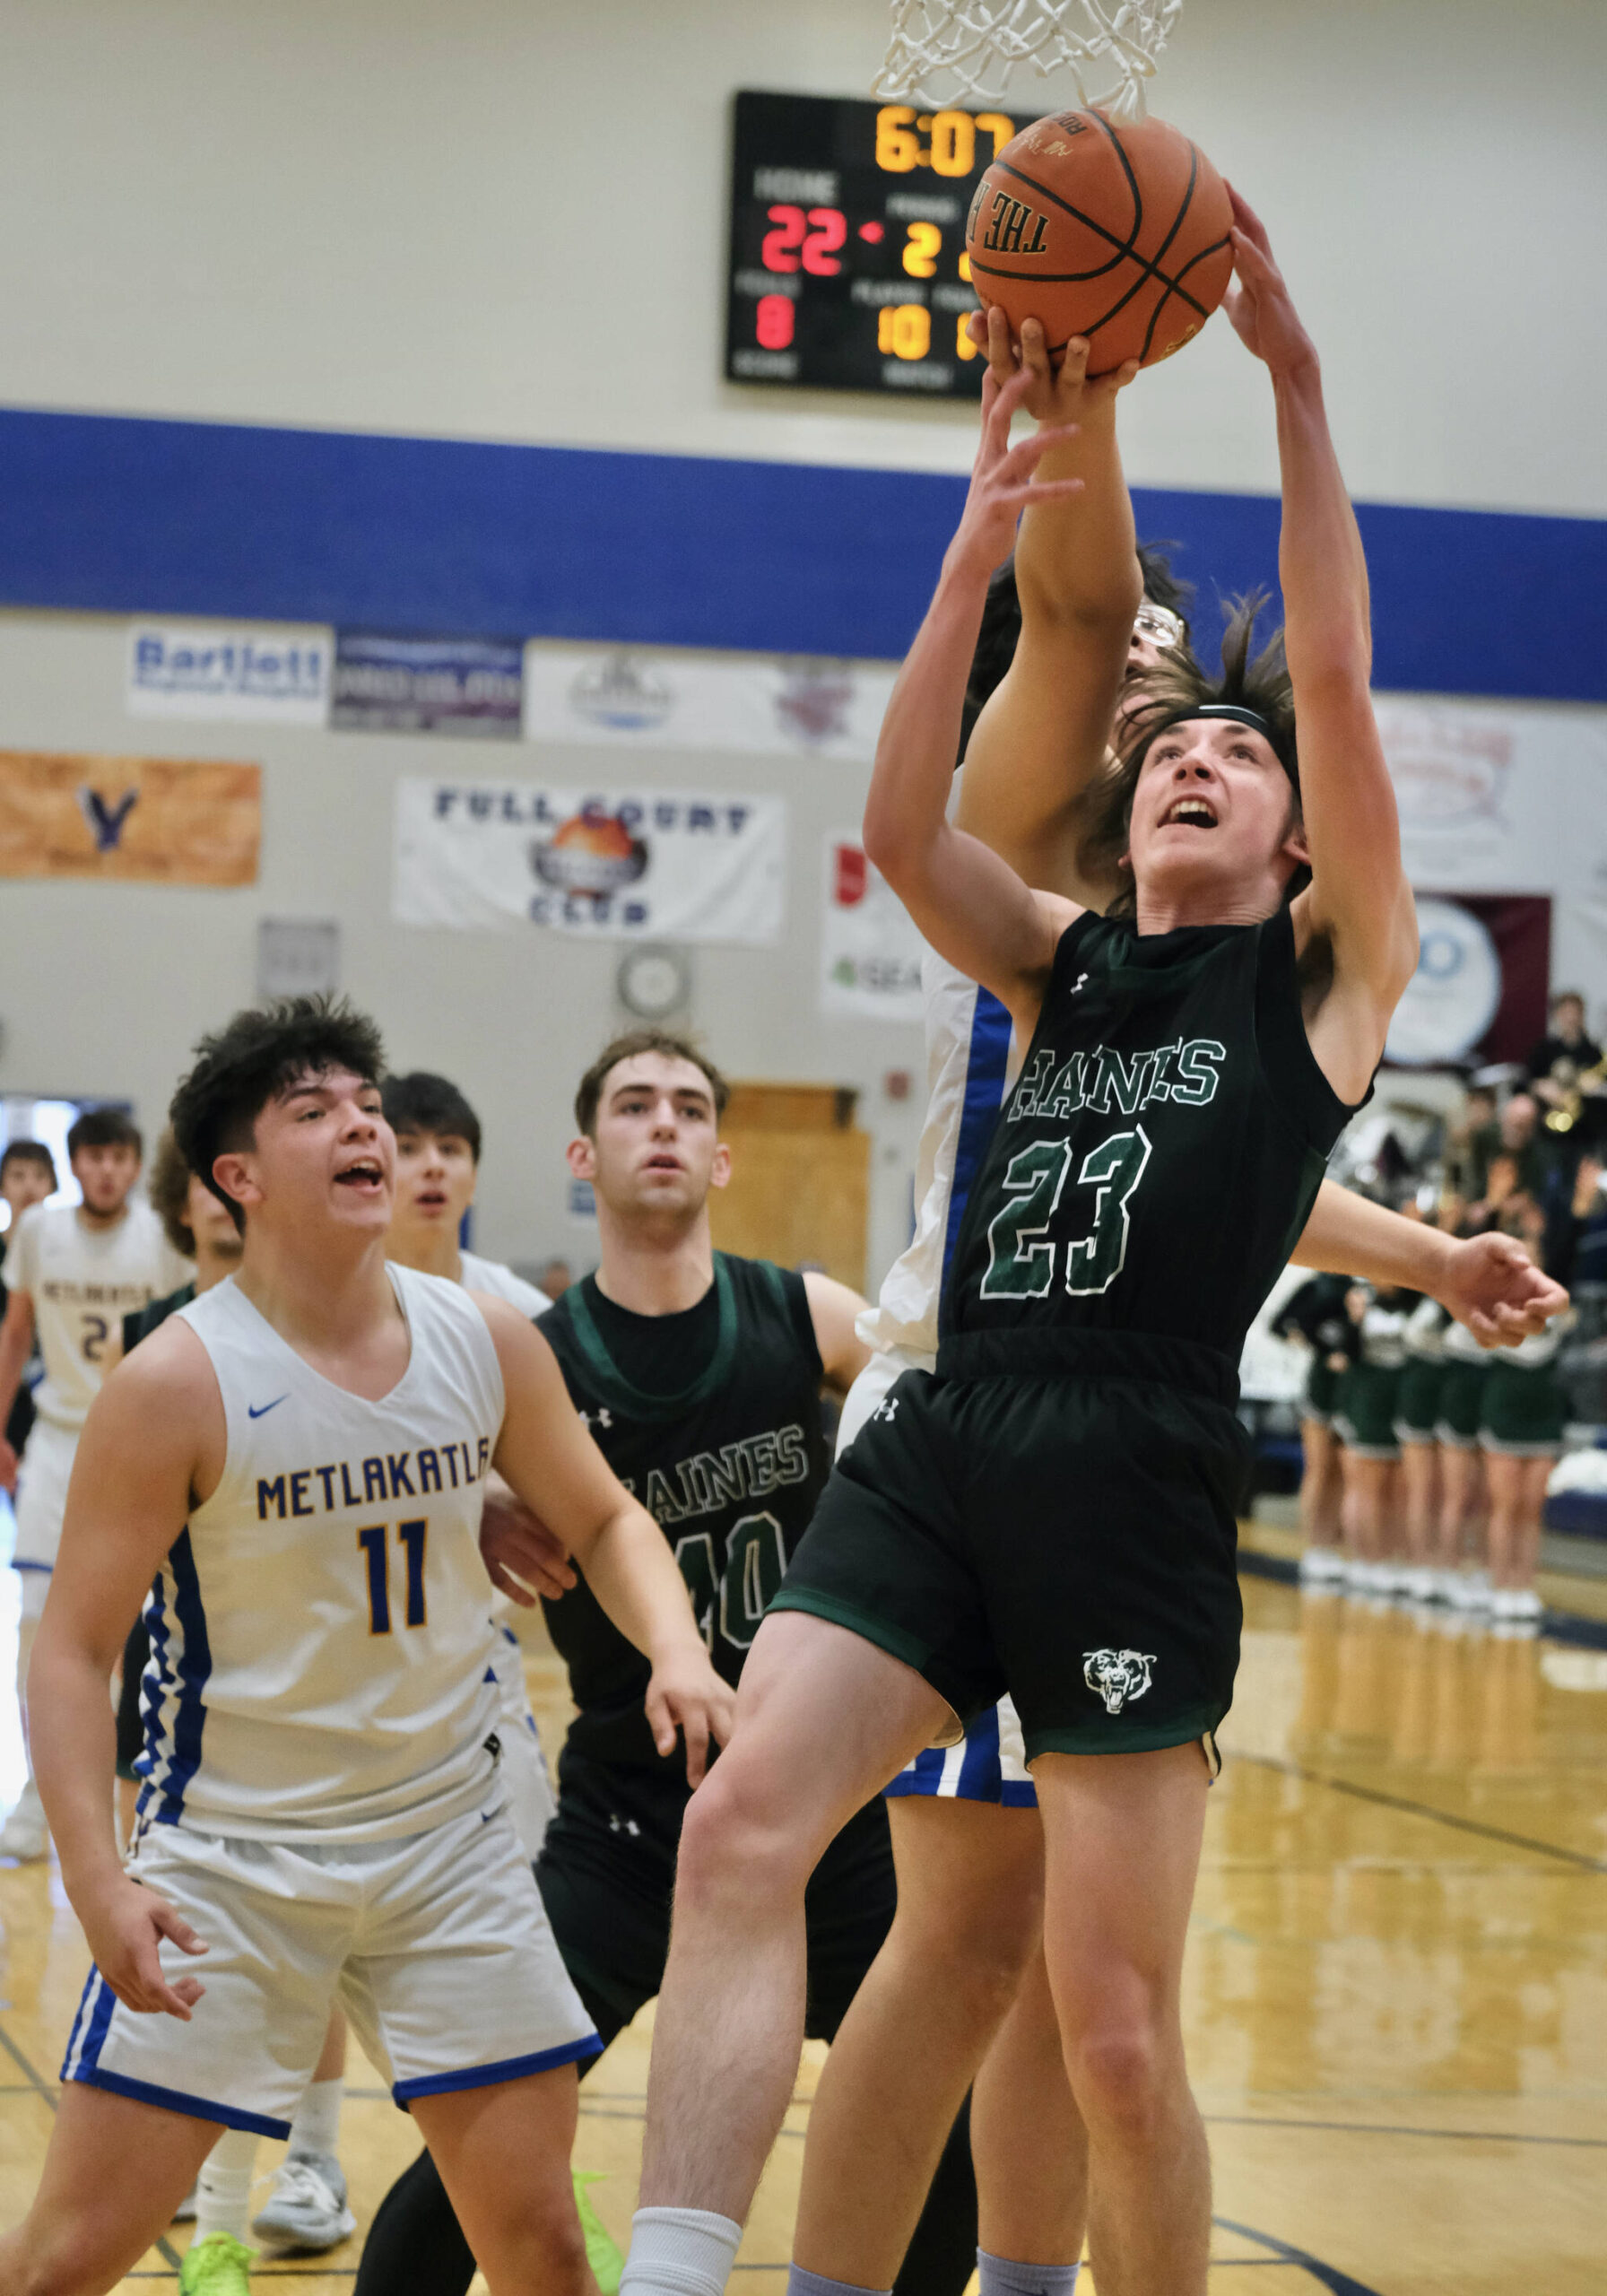 Metlakatla’s Aaron O’Brien takes a rebound from behind Haines’ Phoenix Swaner (23) during the Region V tournament on Thursday. (Klas Stolpe / For the Juneau Empire)